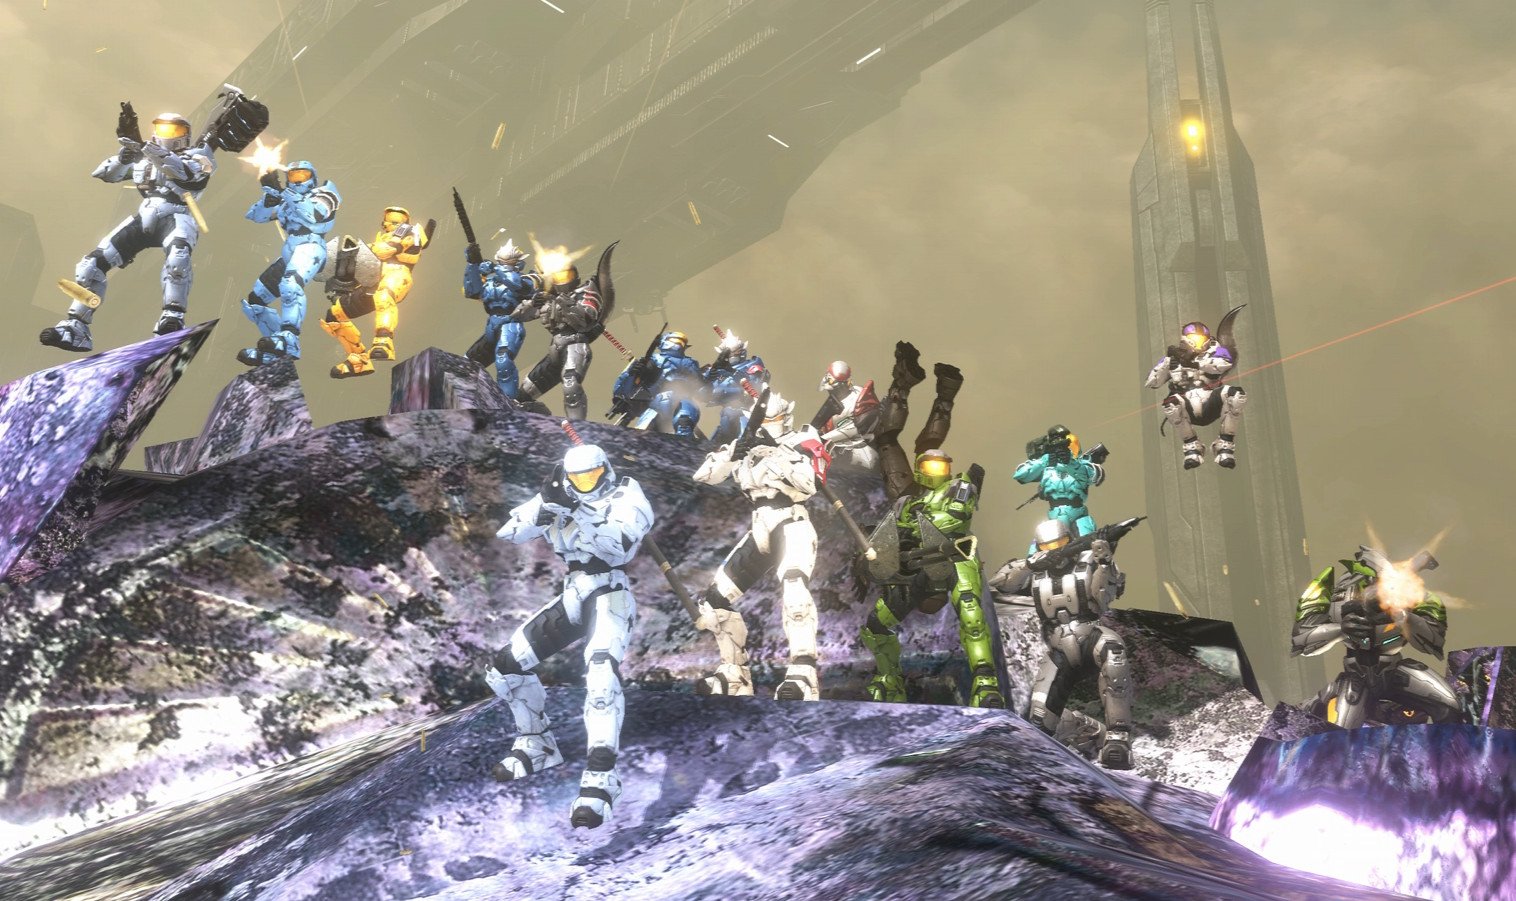 Halo: Reach has the coolest ending in gaming, fans agree